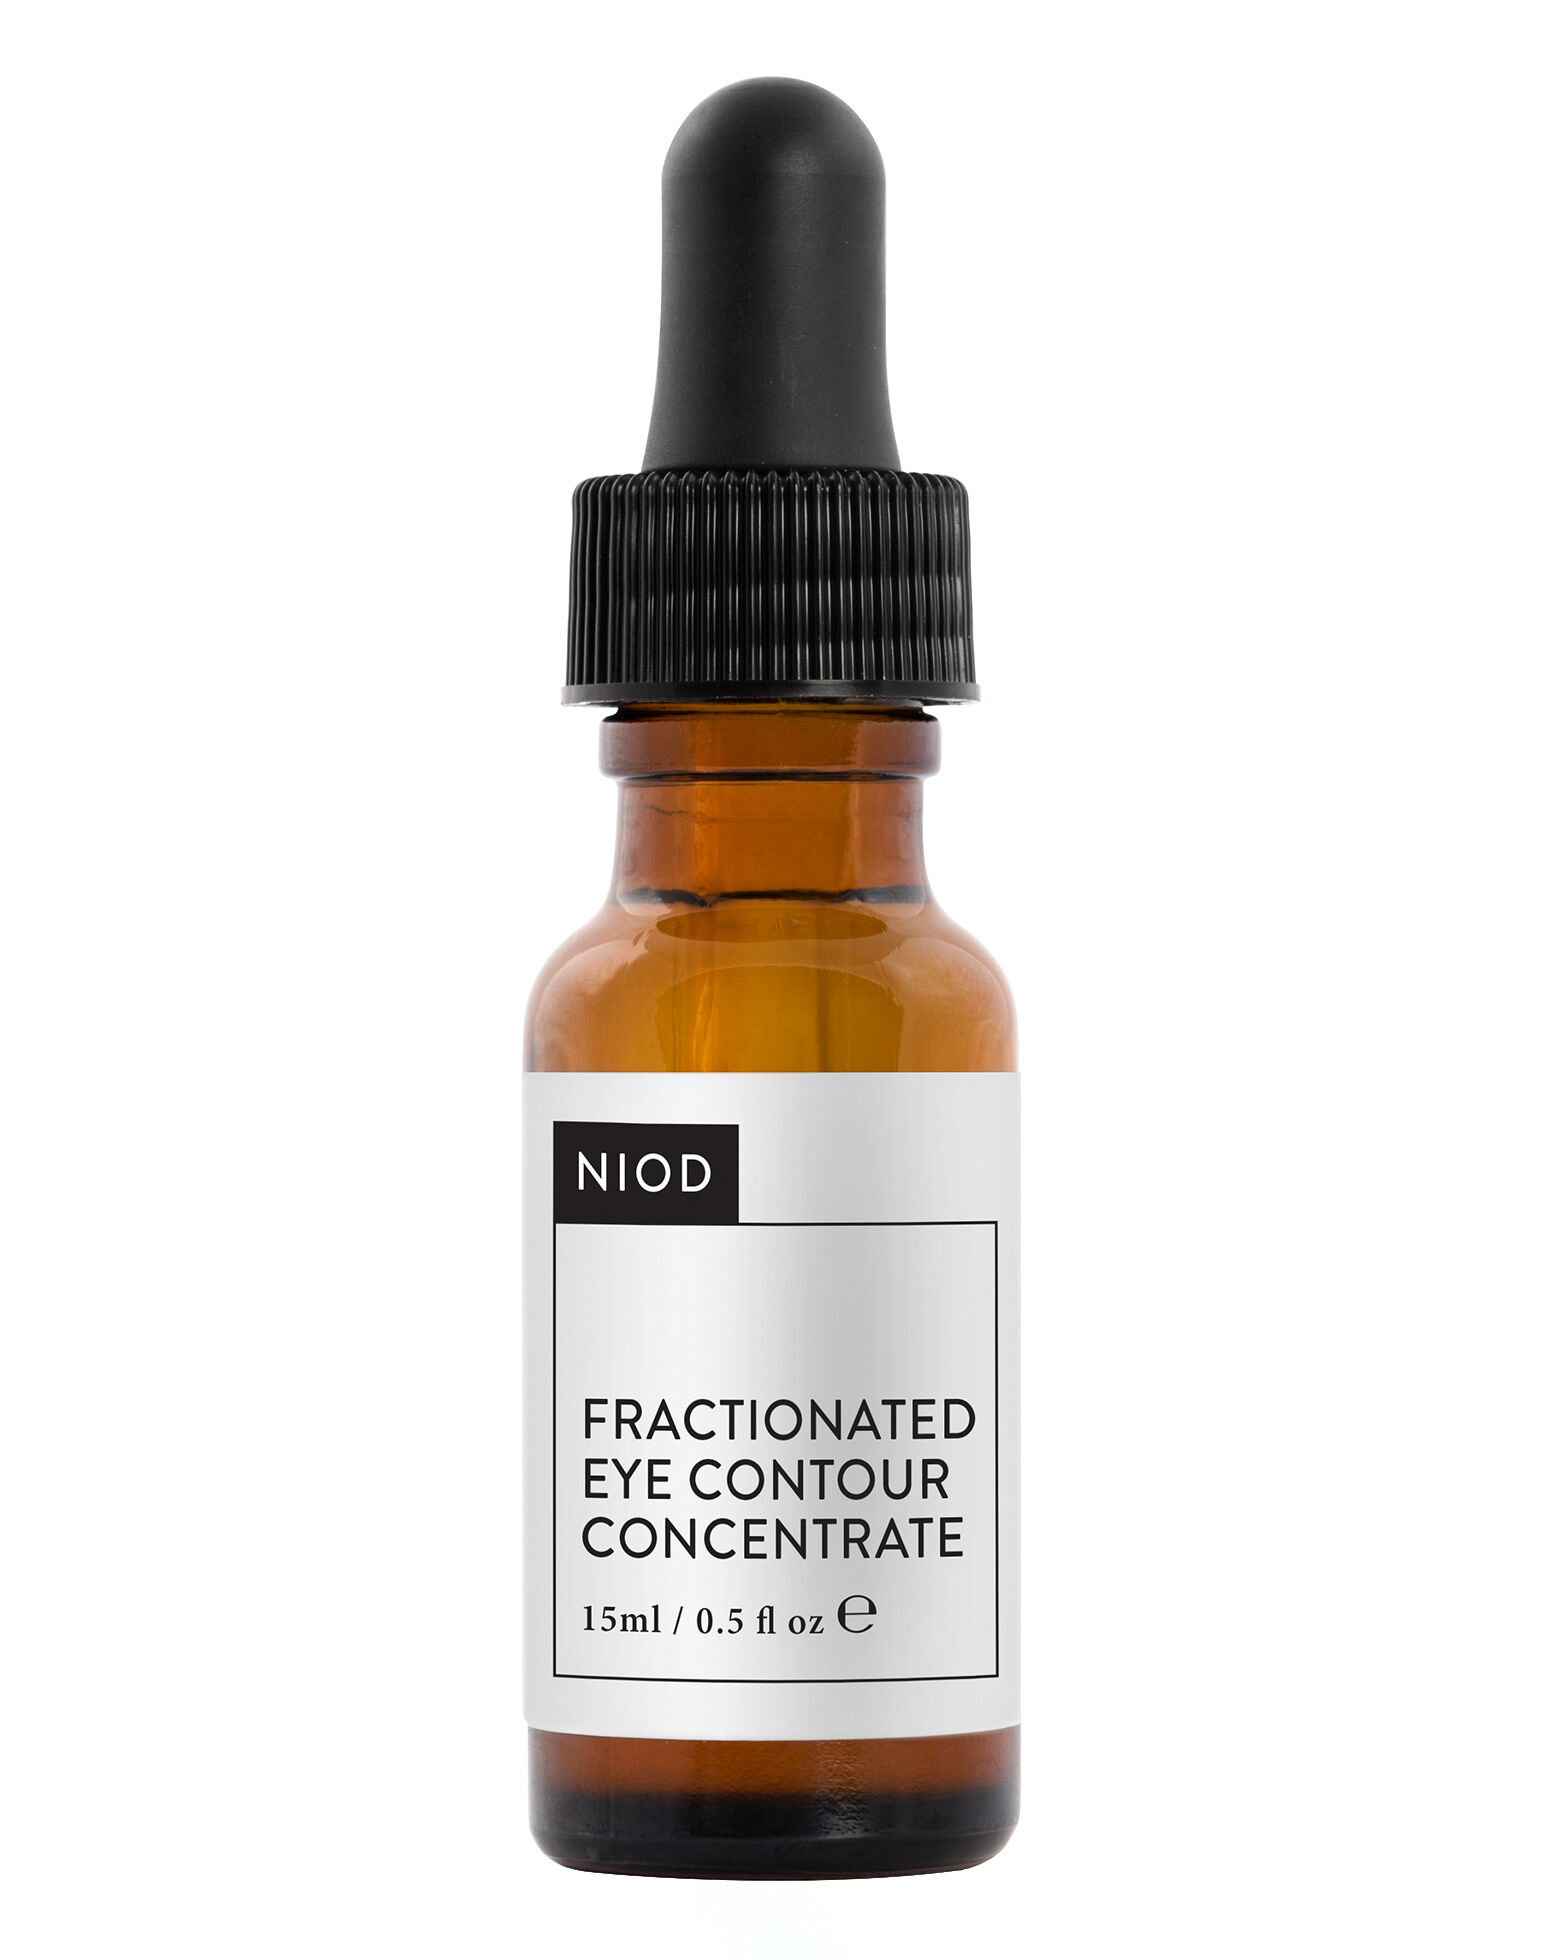 NIOD - Fractionated Eye Contour Concentrate